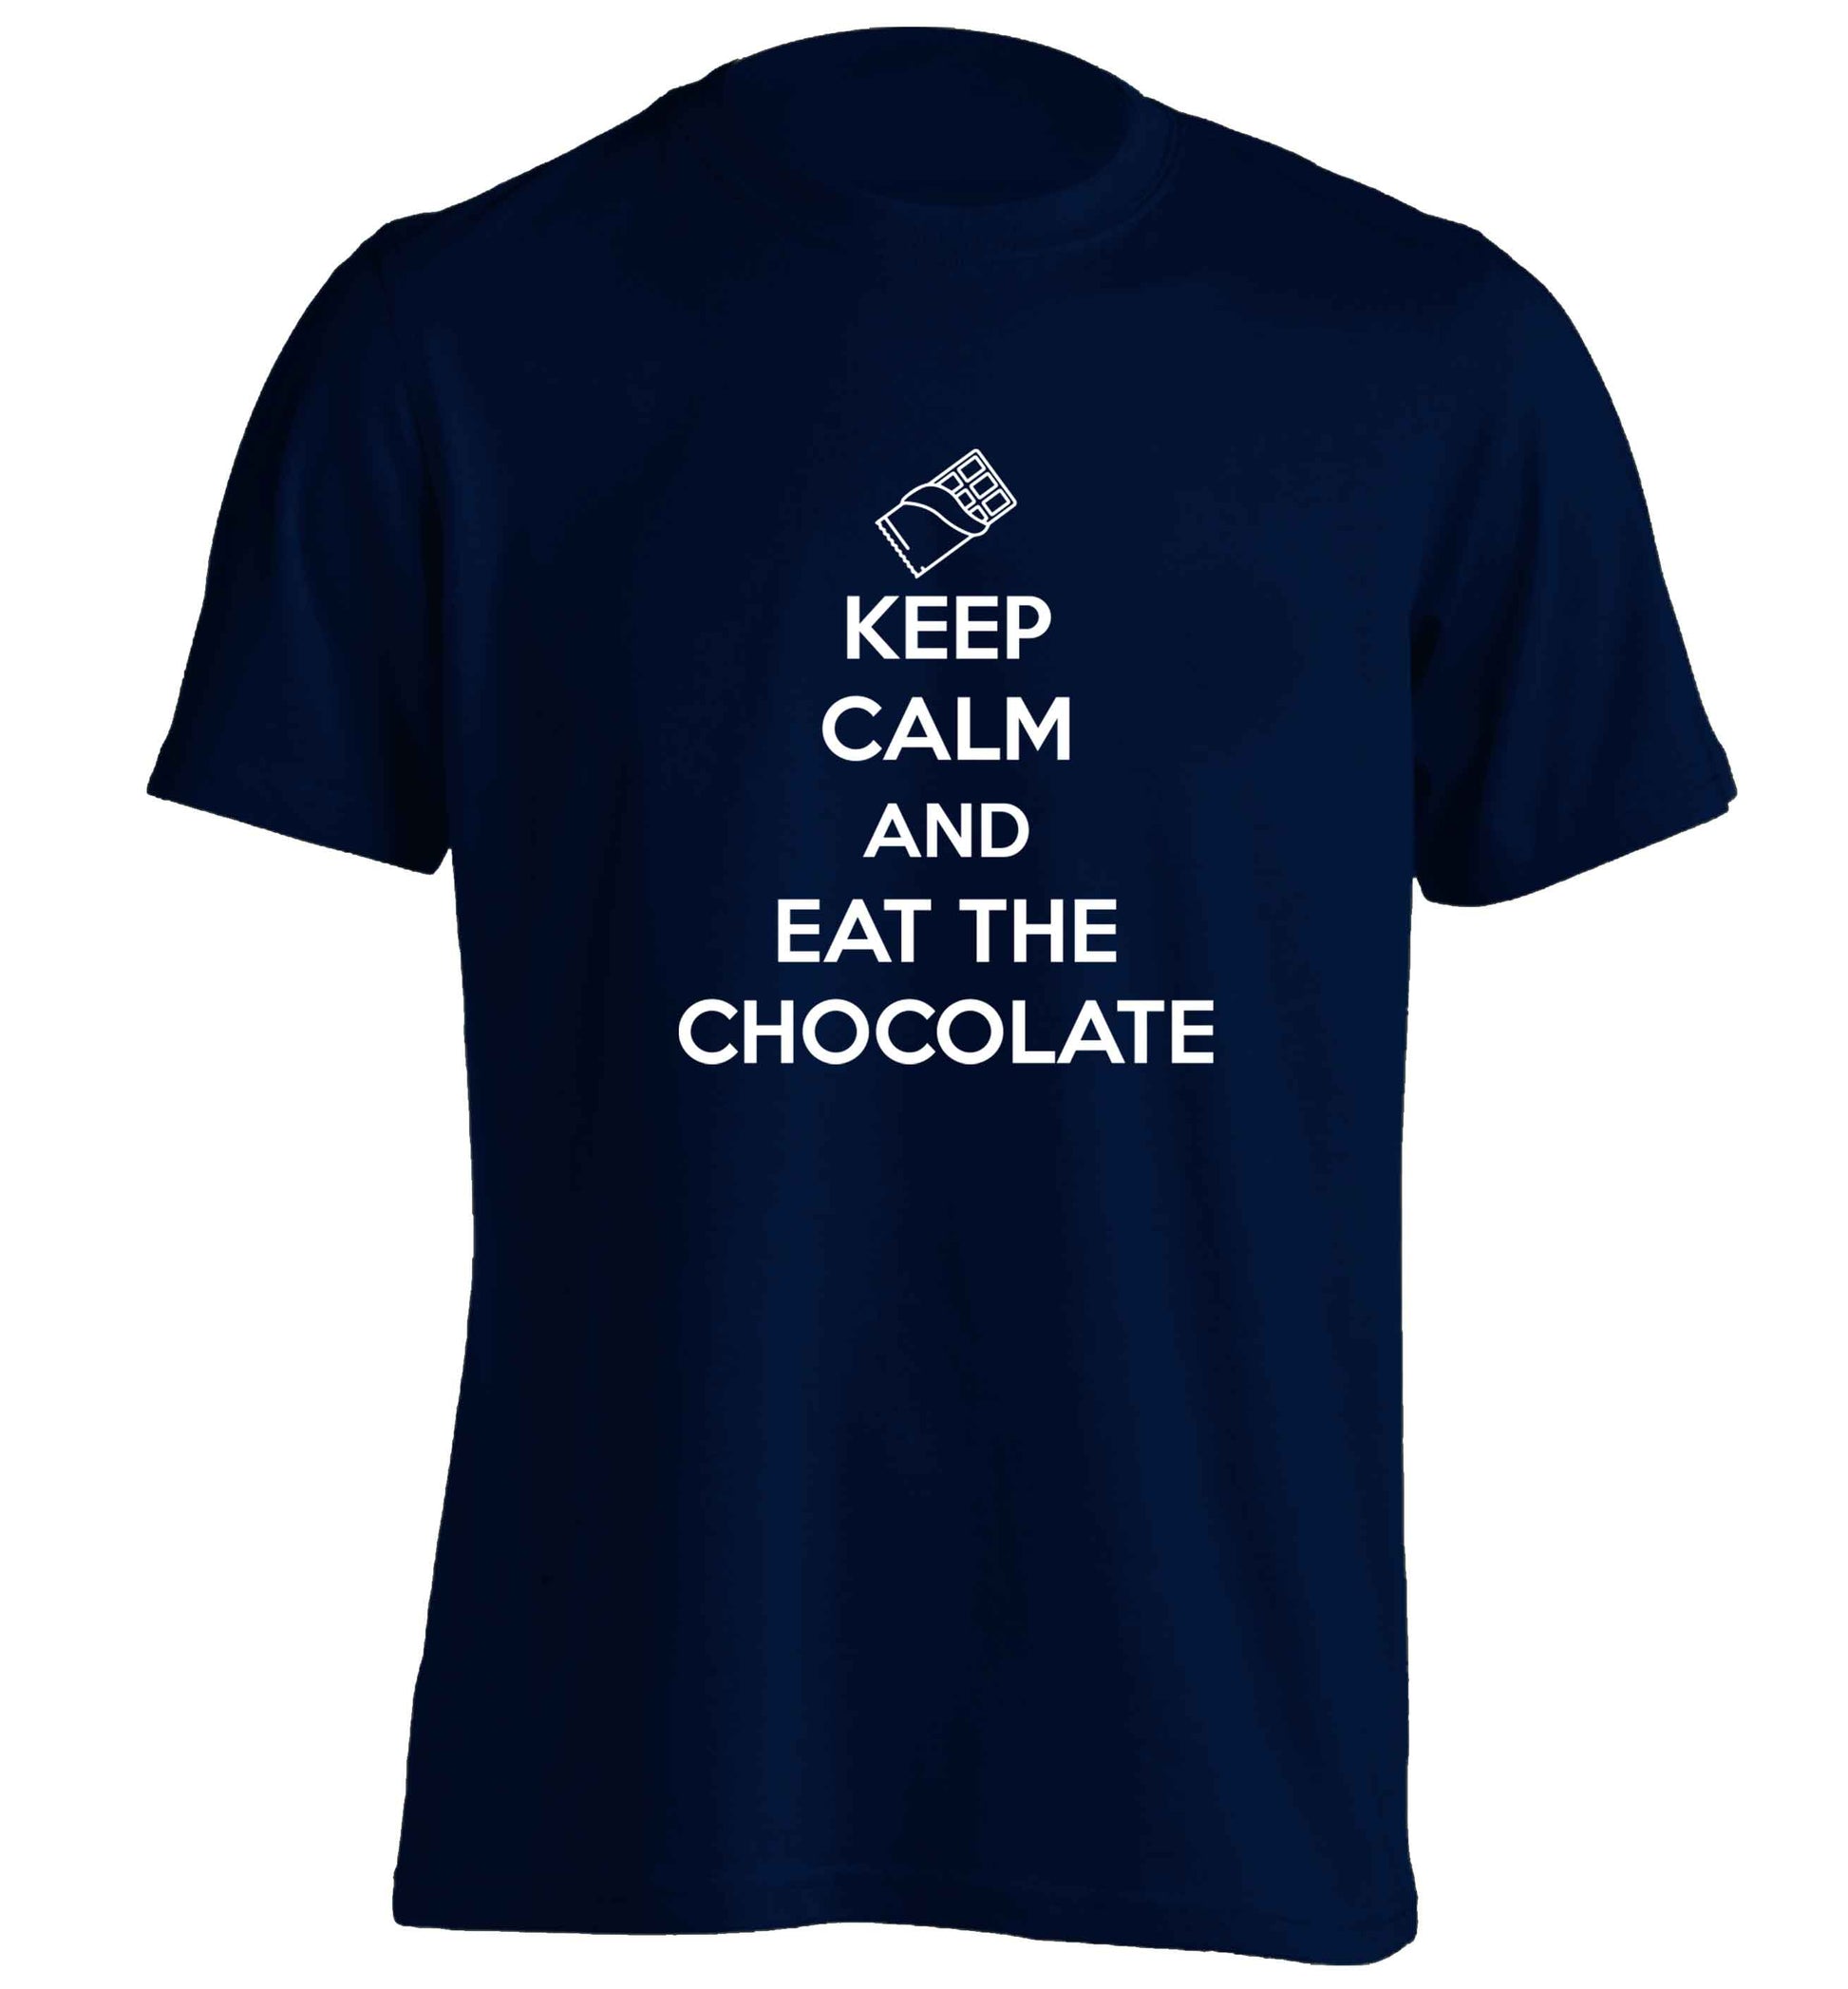 funny gift for a chocaholic! Keep calm and eat the chocolate adults unisex navy Tshirt 2XL